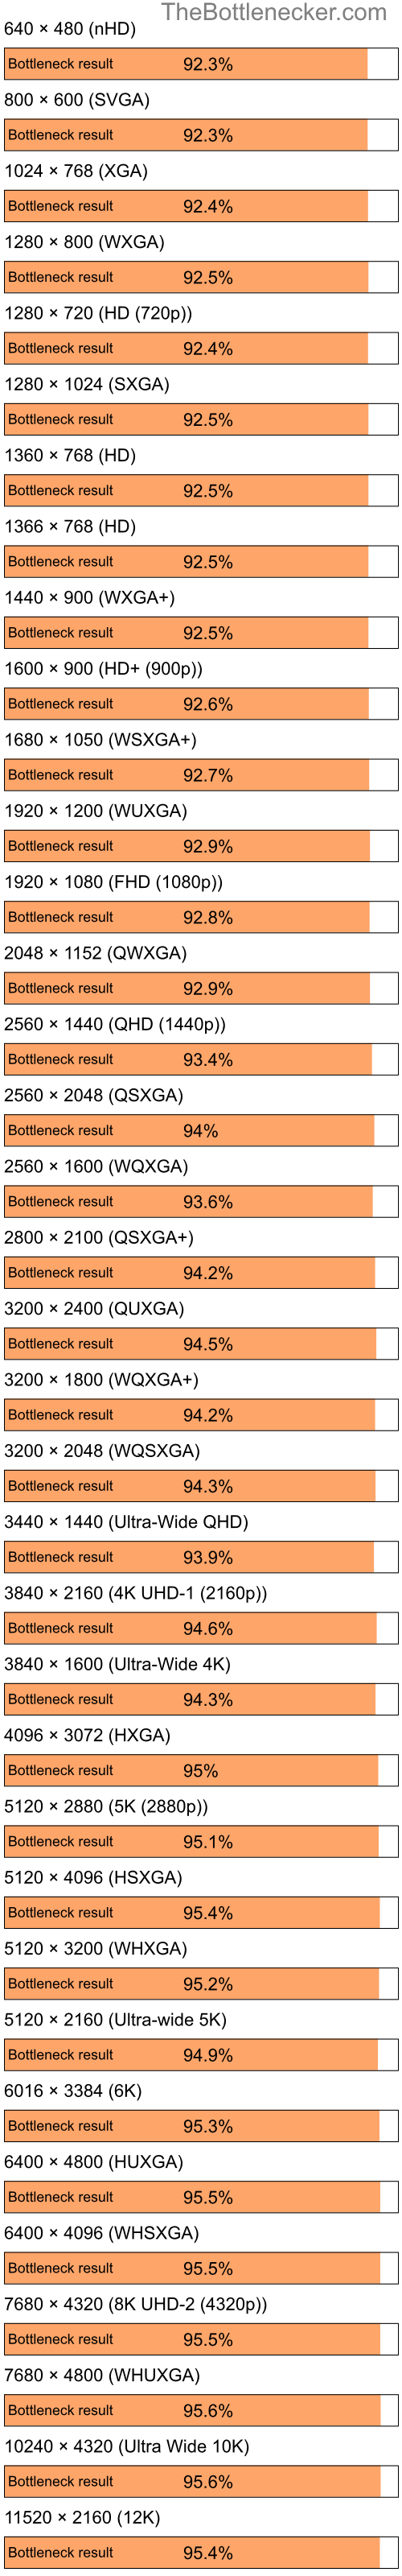 Bottleneck results by resolution for Intel Celeron M 420 and NVIDIA GeForce3 Ti 200 in Graphic Card Intense Tasks